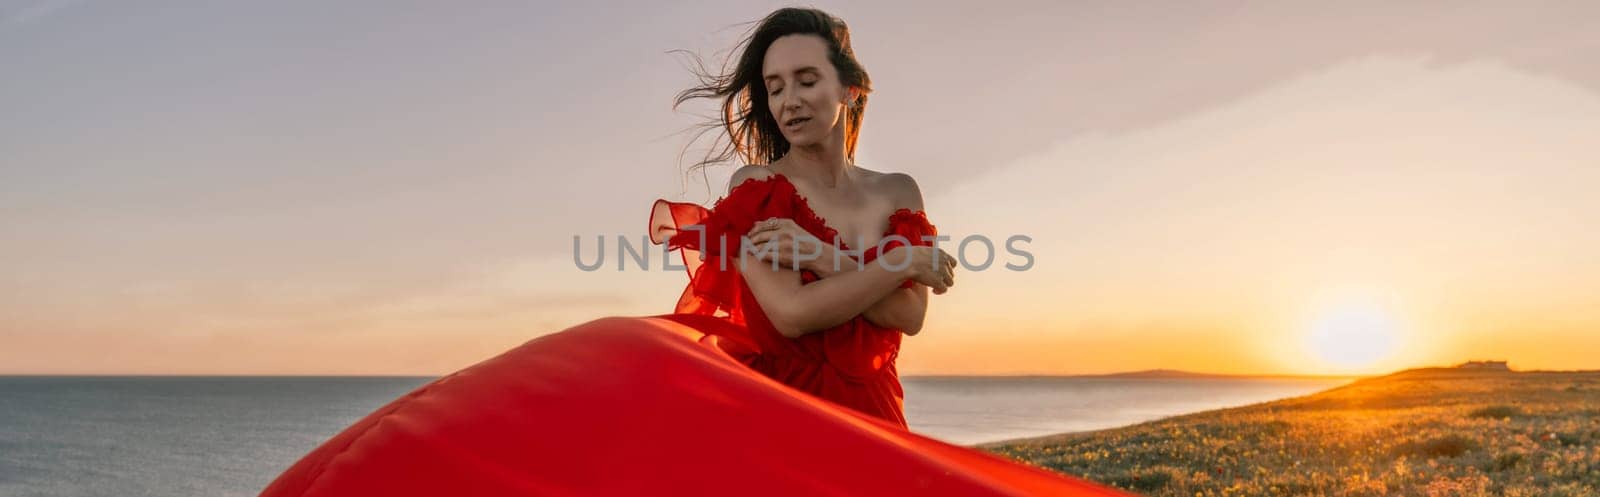 woman red dress standing grassy hillside. The sun is setting in the background, casting a warm glow over the scene. The woman is enjoying the beautiful view and the peaceful atmosphere. by Matiunina